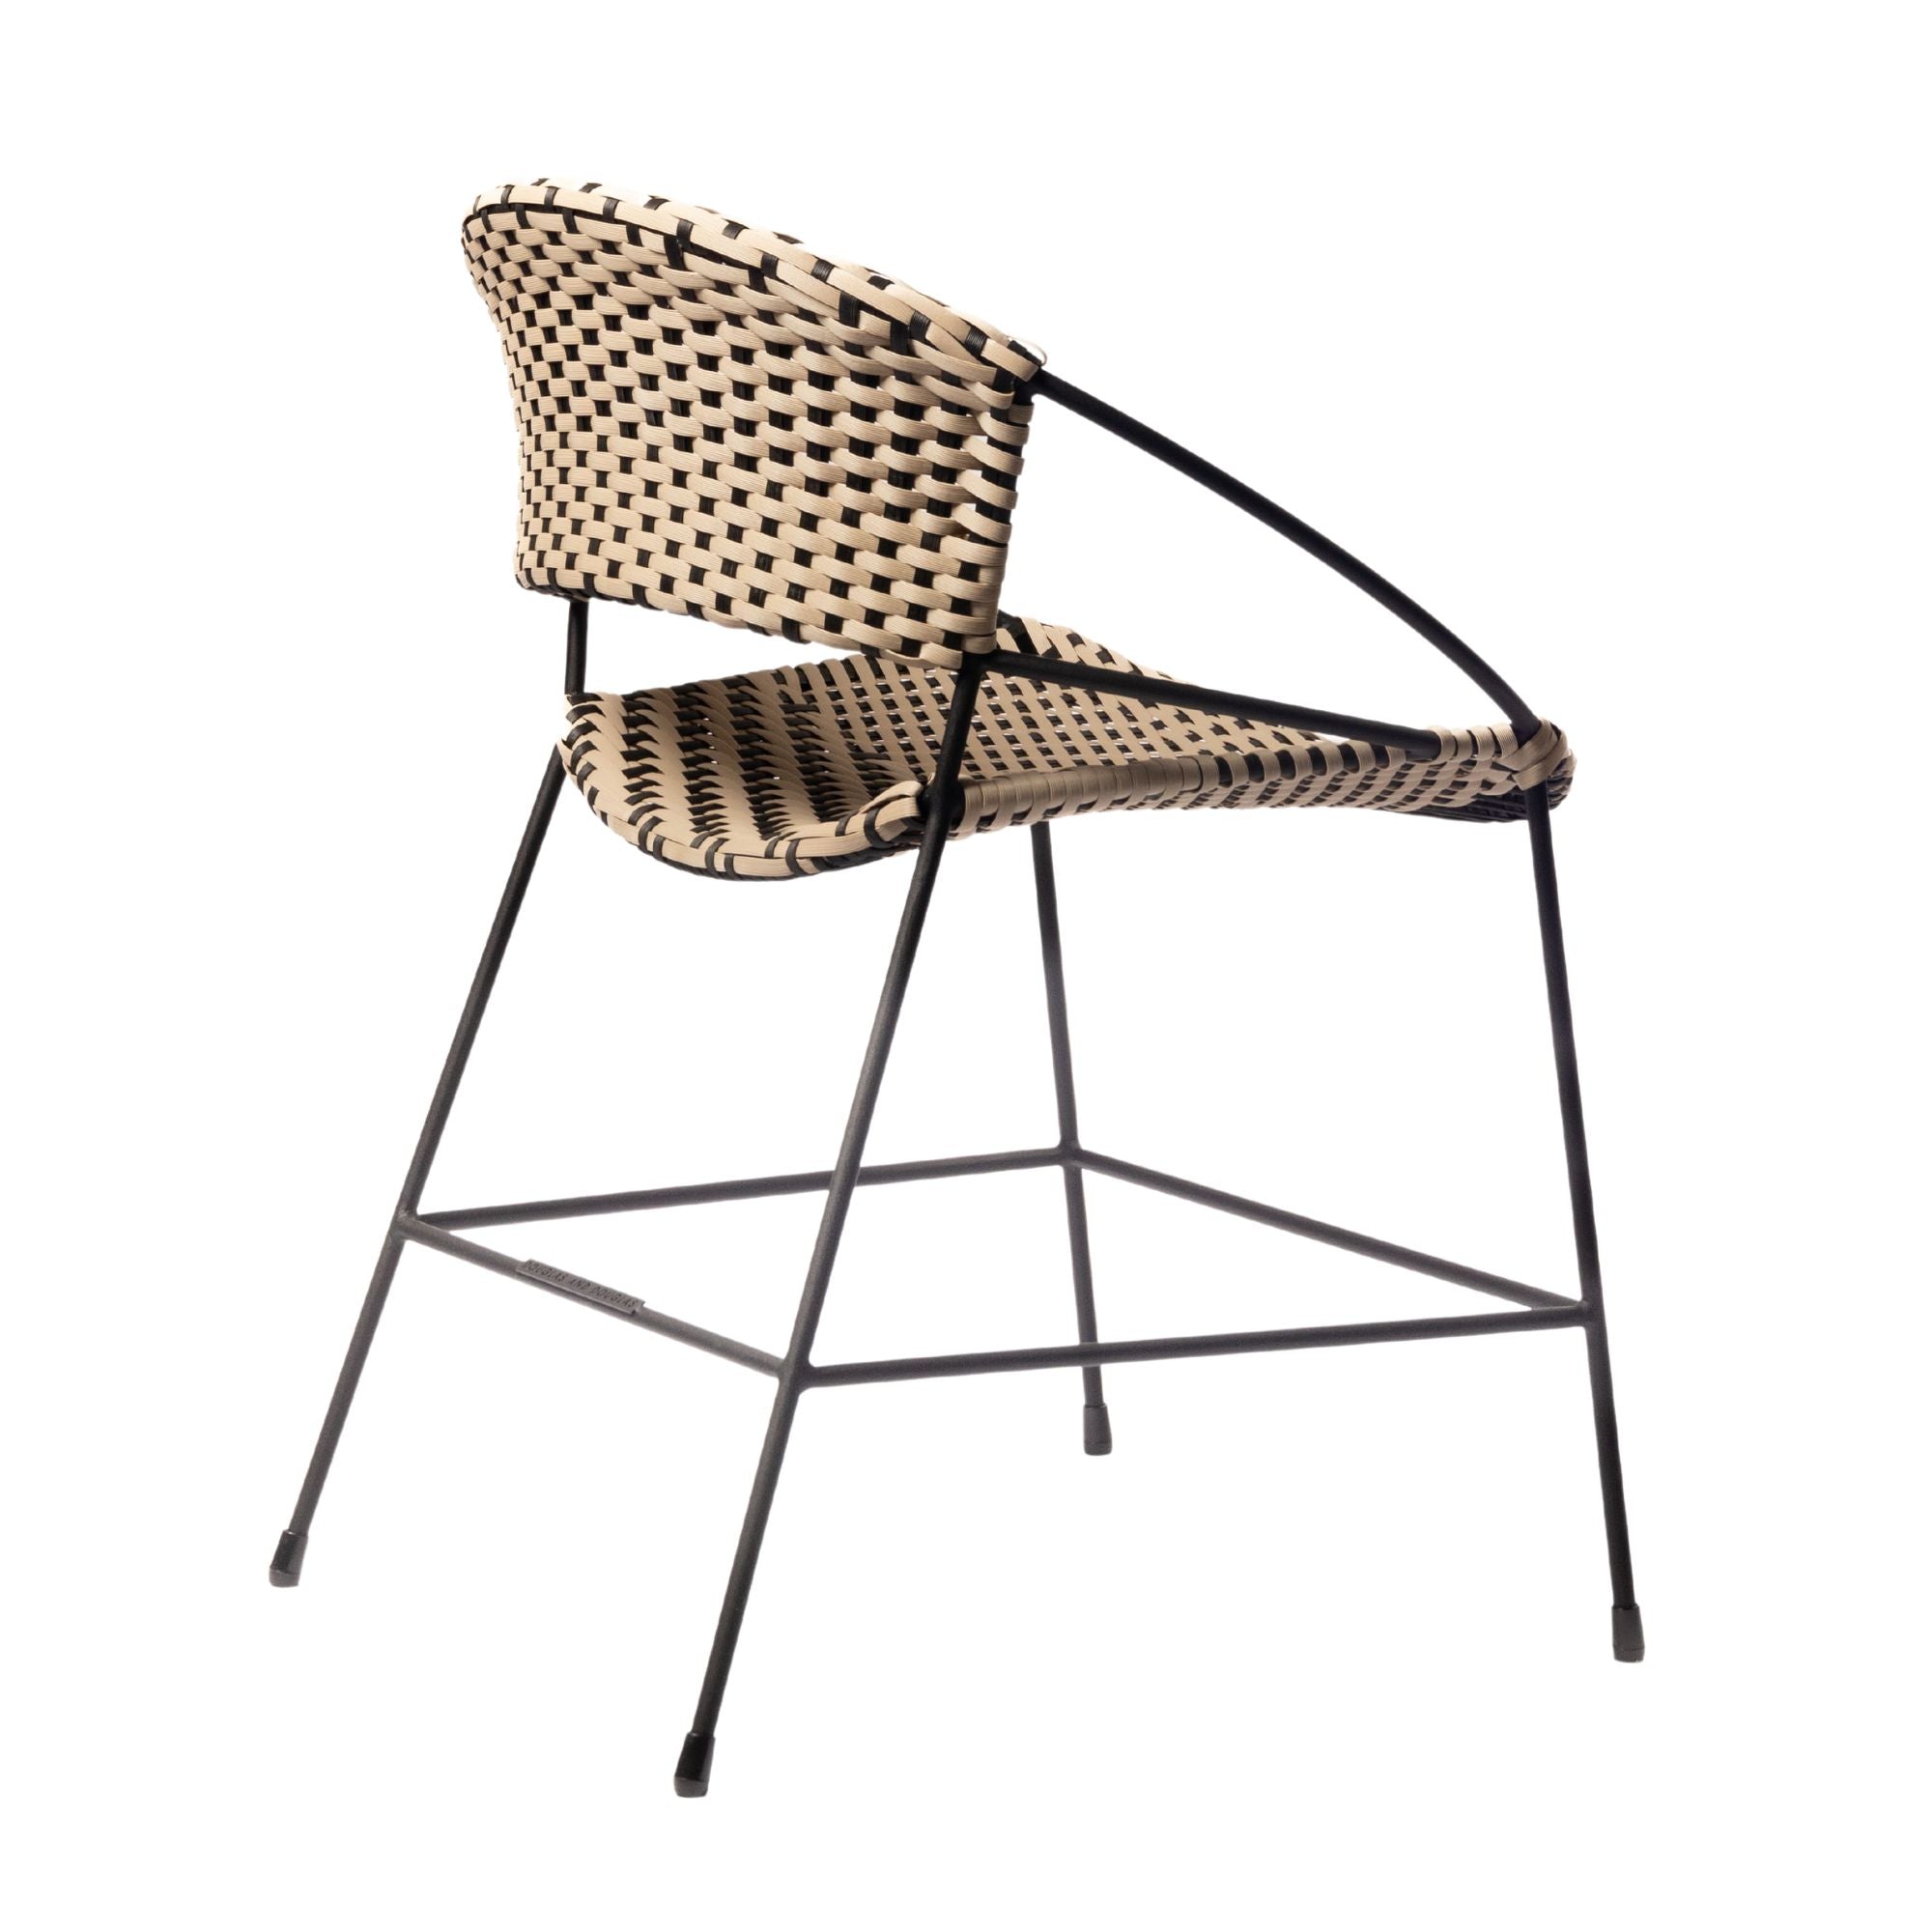 Woven Outdoor Dining Chair - Chobe